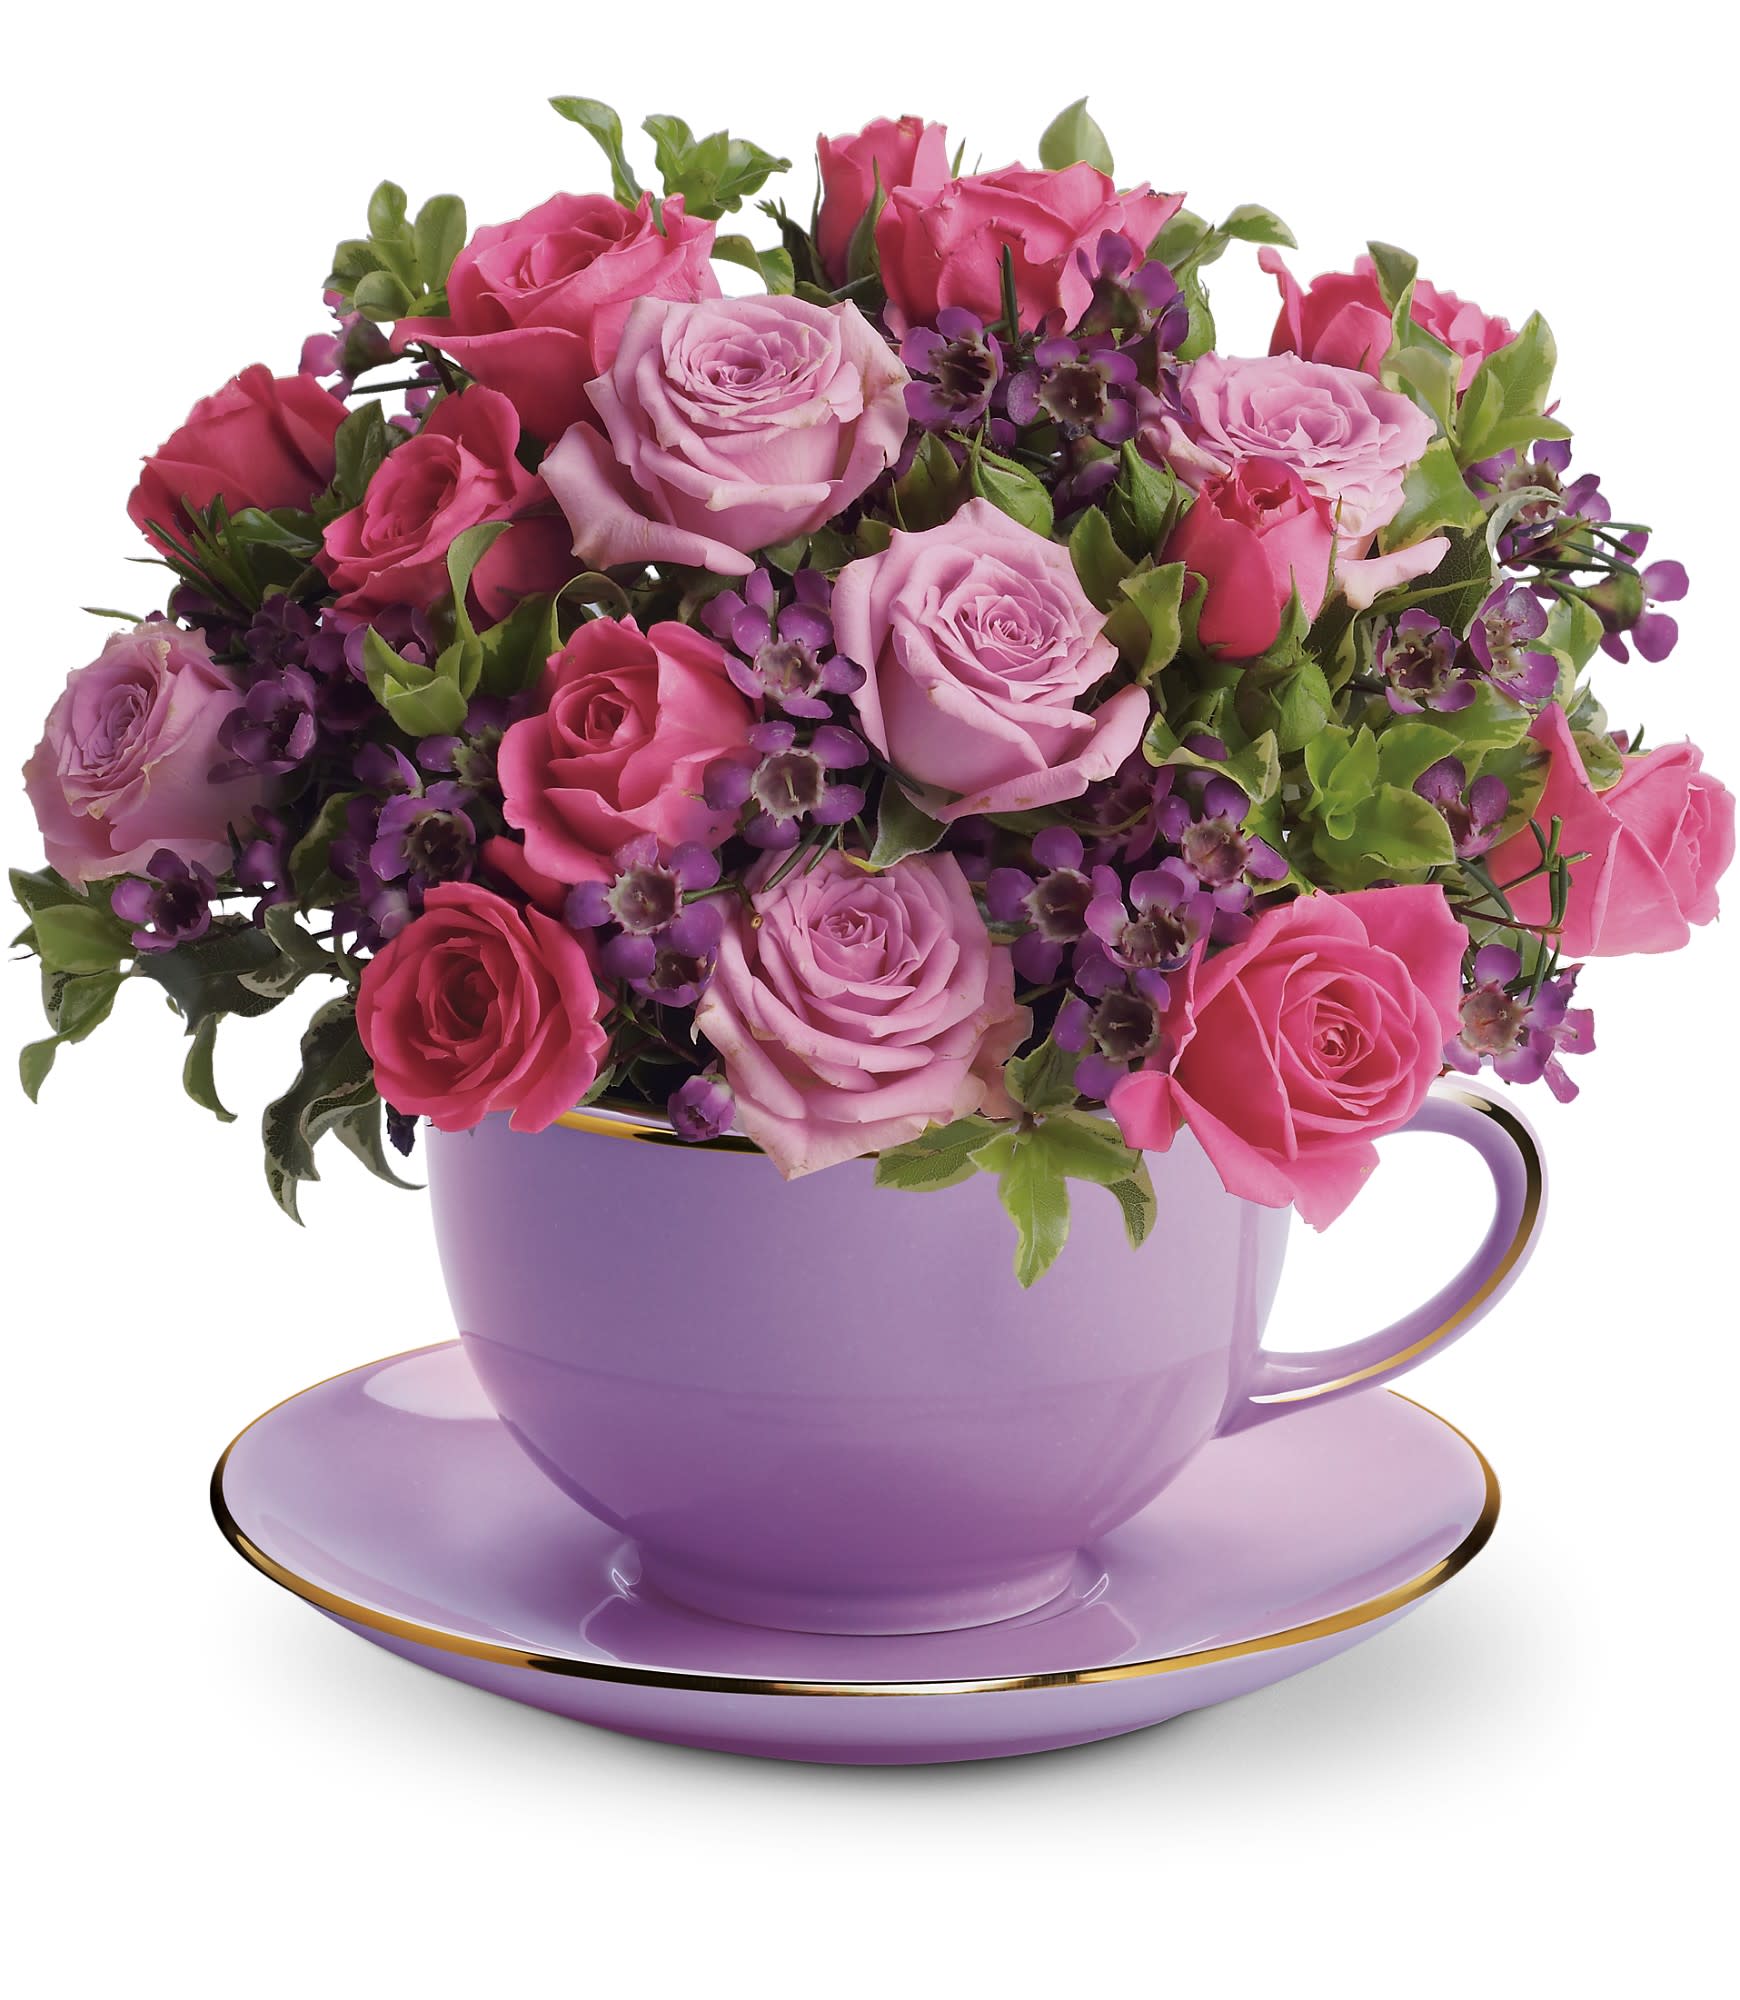 Teleflora's Cup of Roses Bouquet - The cool beauty of this distinctive gift will soothe a family member's soul. And the fact that you have chosen such a unique remembrance will make this delivery even more special.  